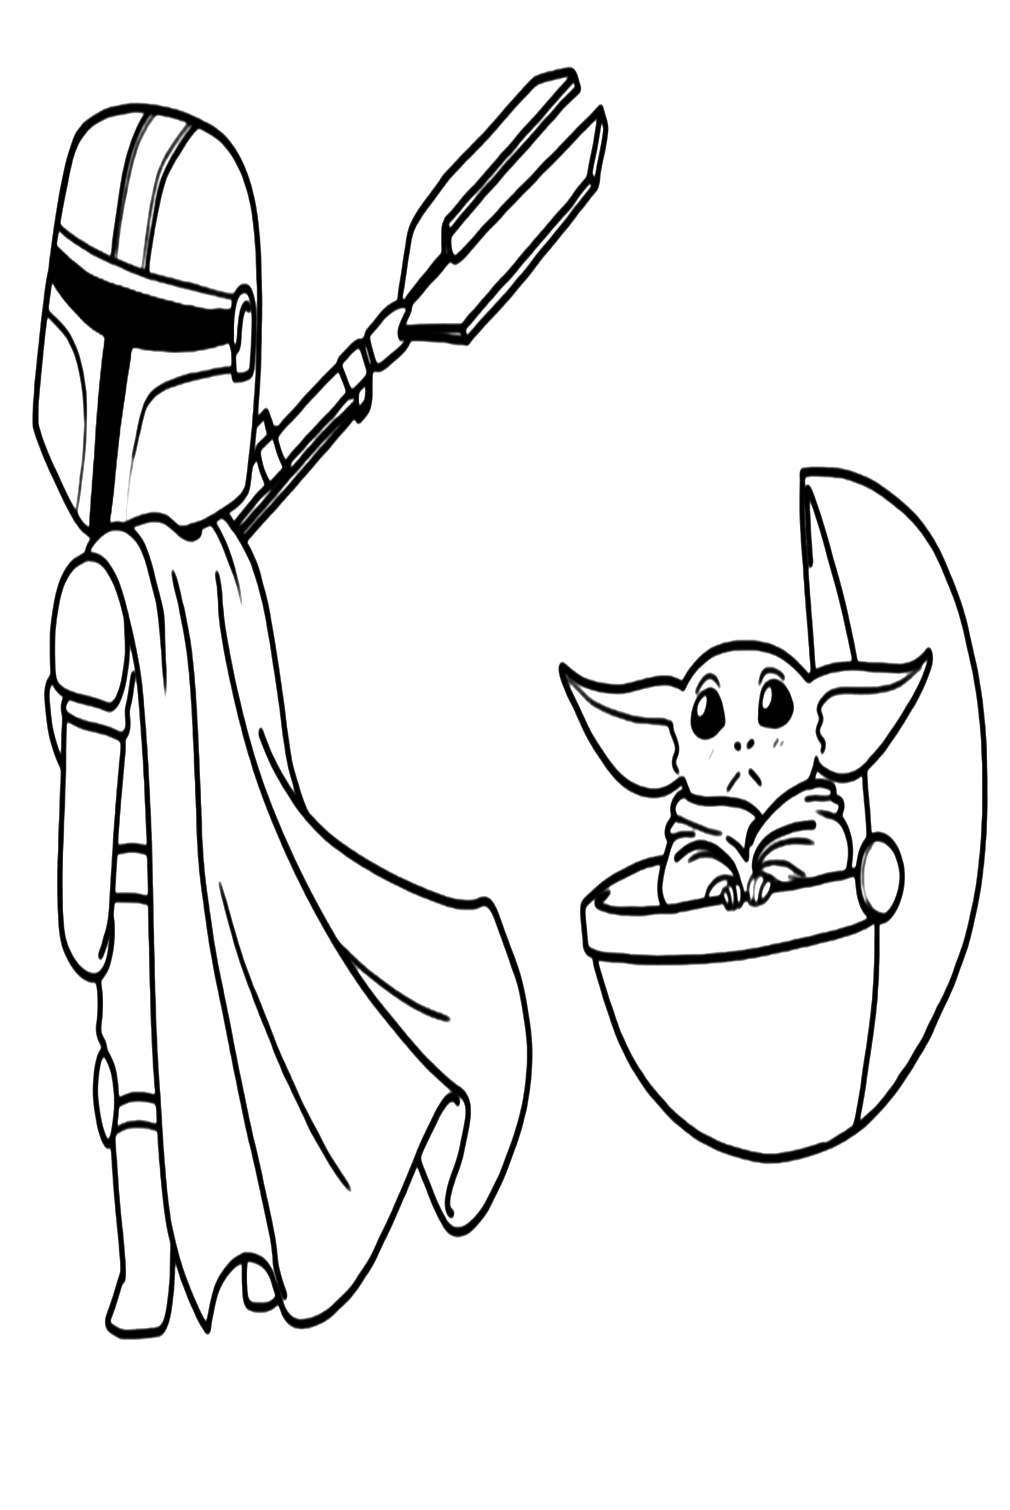 80 Free Printable Baby Yoda Coloring Pages